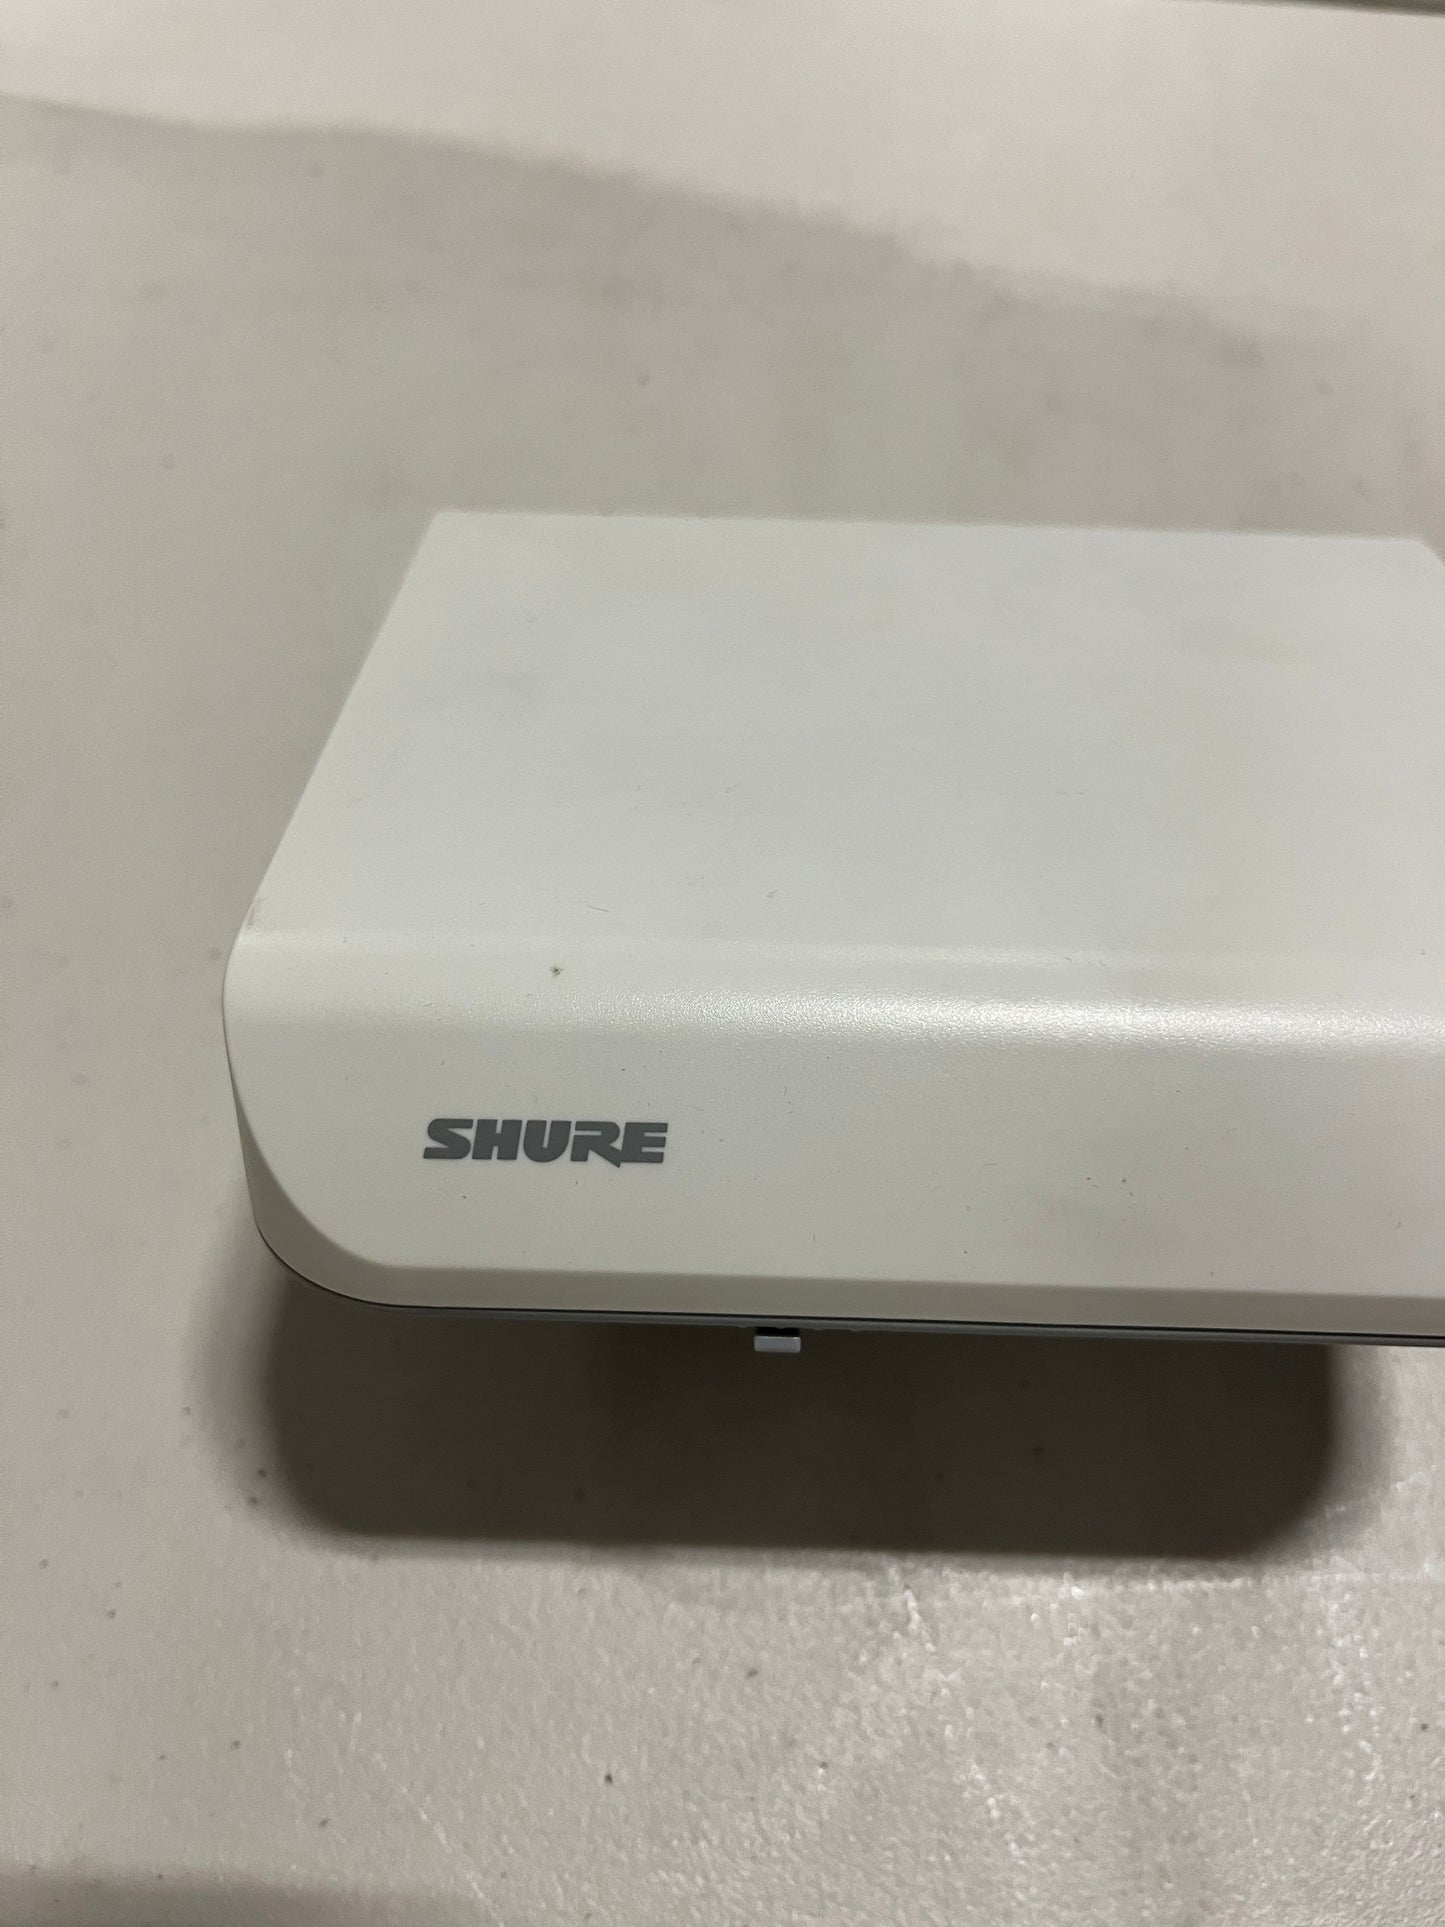 Used Shure UA864US Wall-mounted Wideband Antenna for Sale. We Sell Professional Audio Equipment. Audio Systems, Amplifiers, Consoles, Mixers, Electronics, Entertainment and Live Sound.